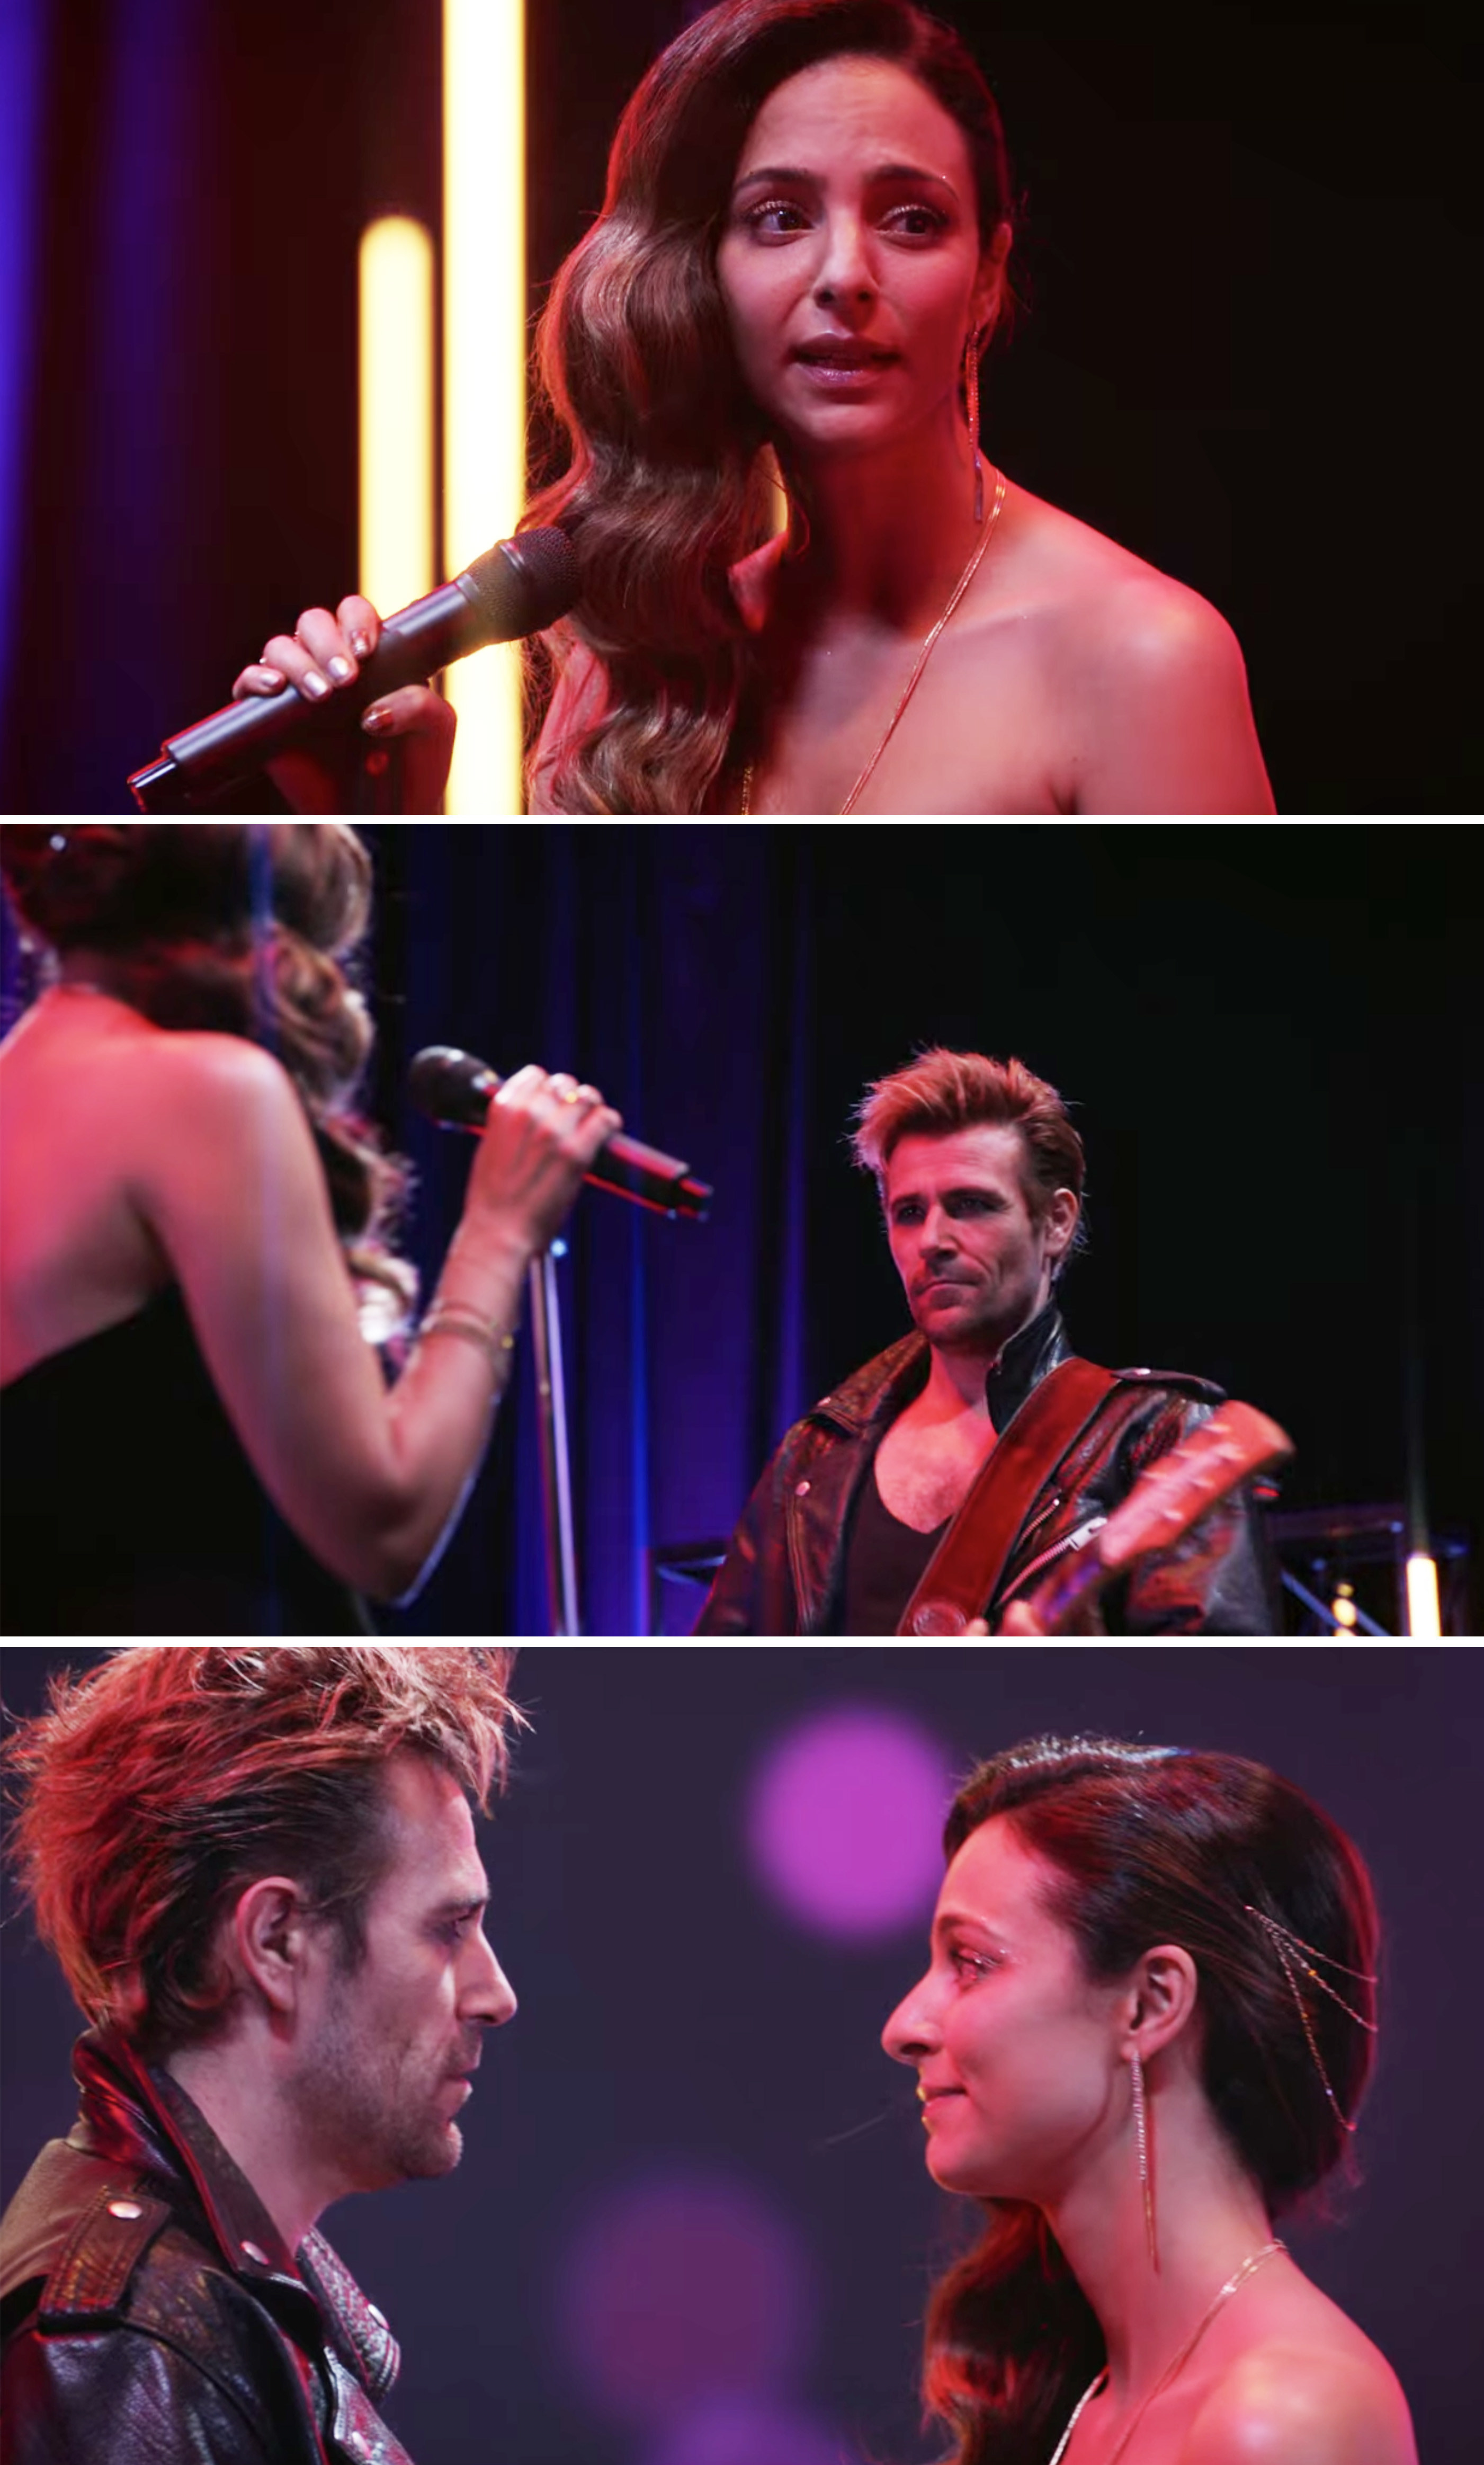 Constantine and Zari singing together